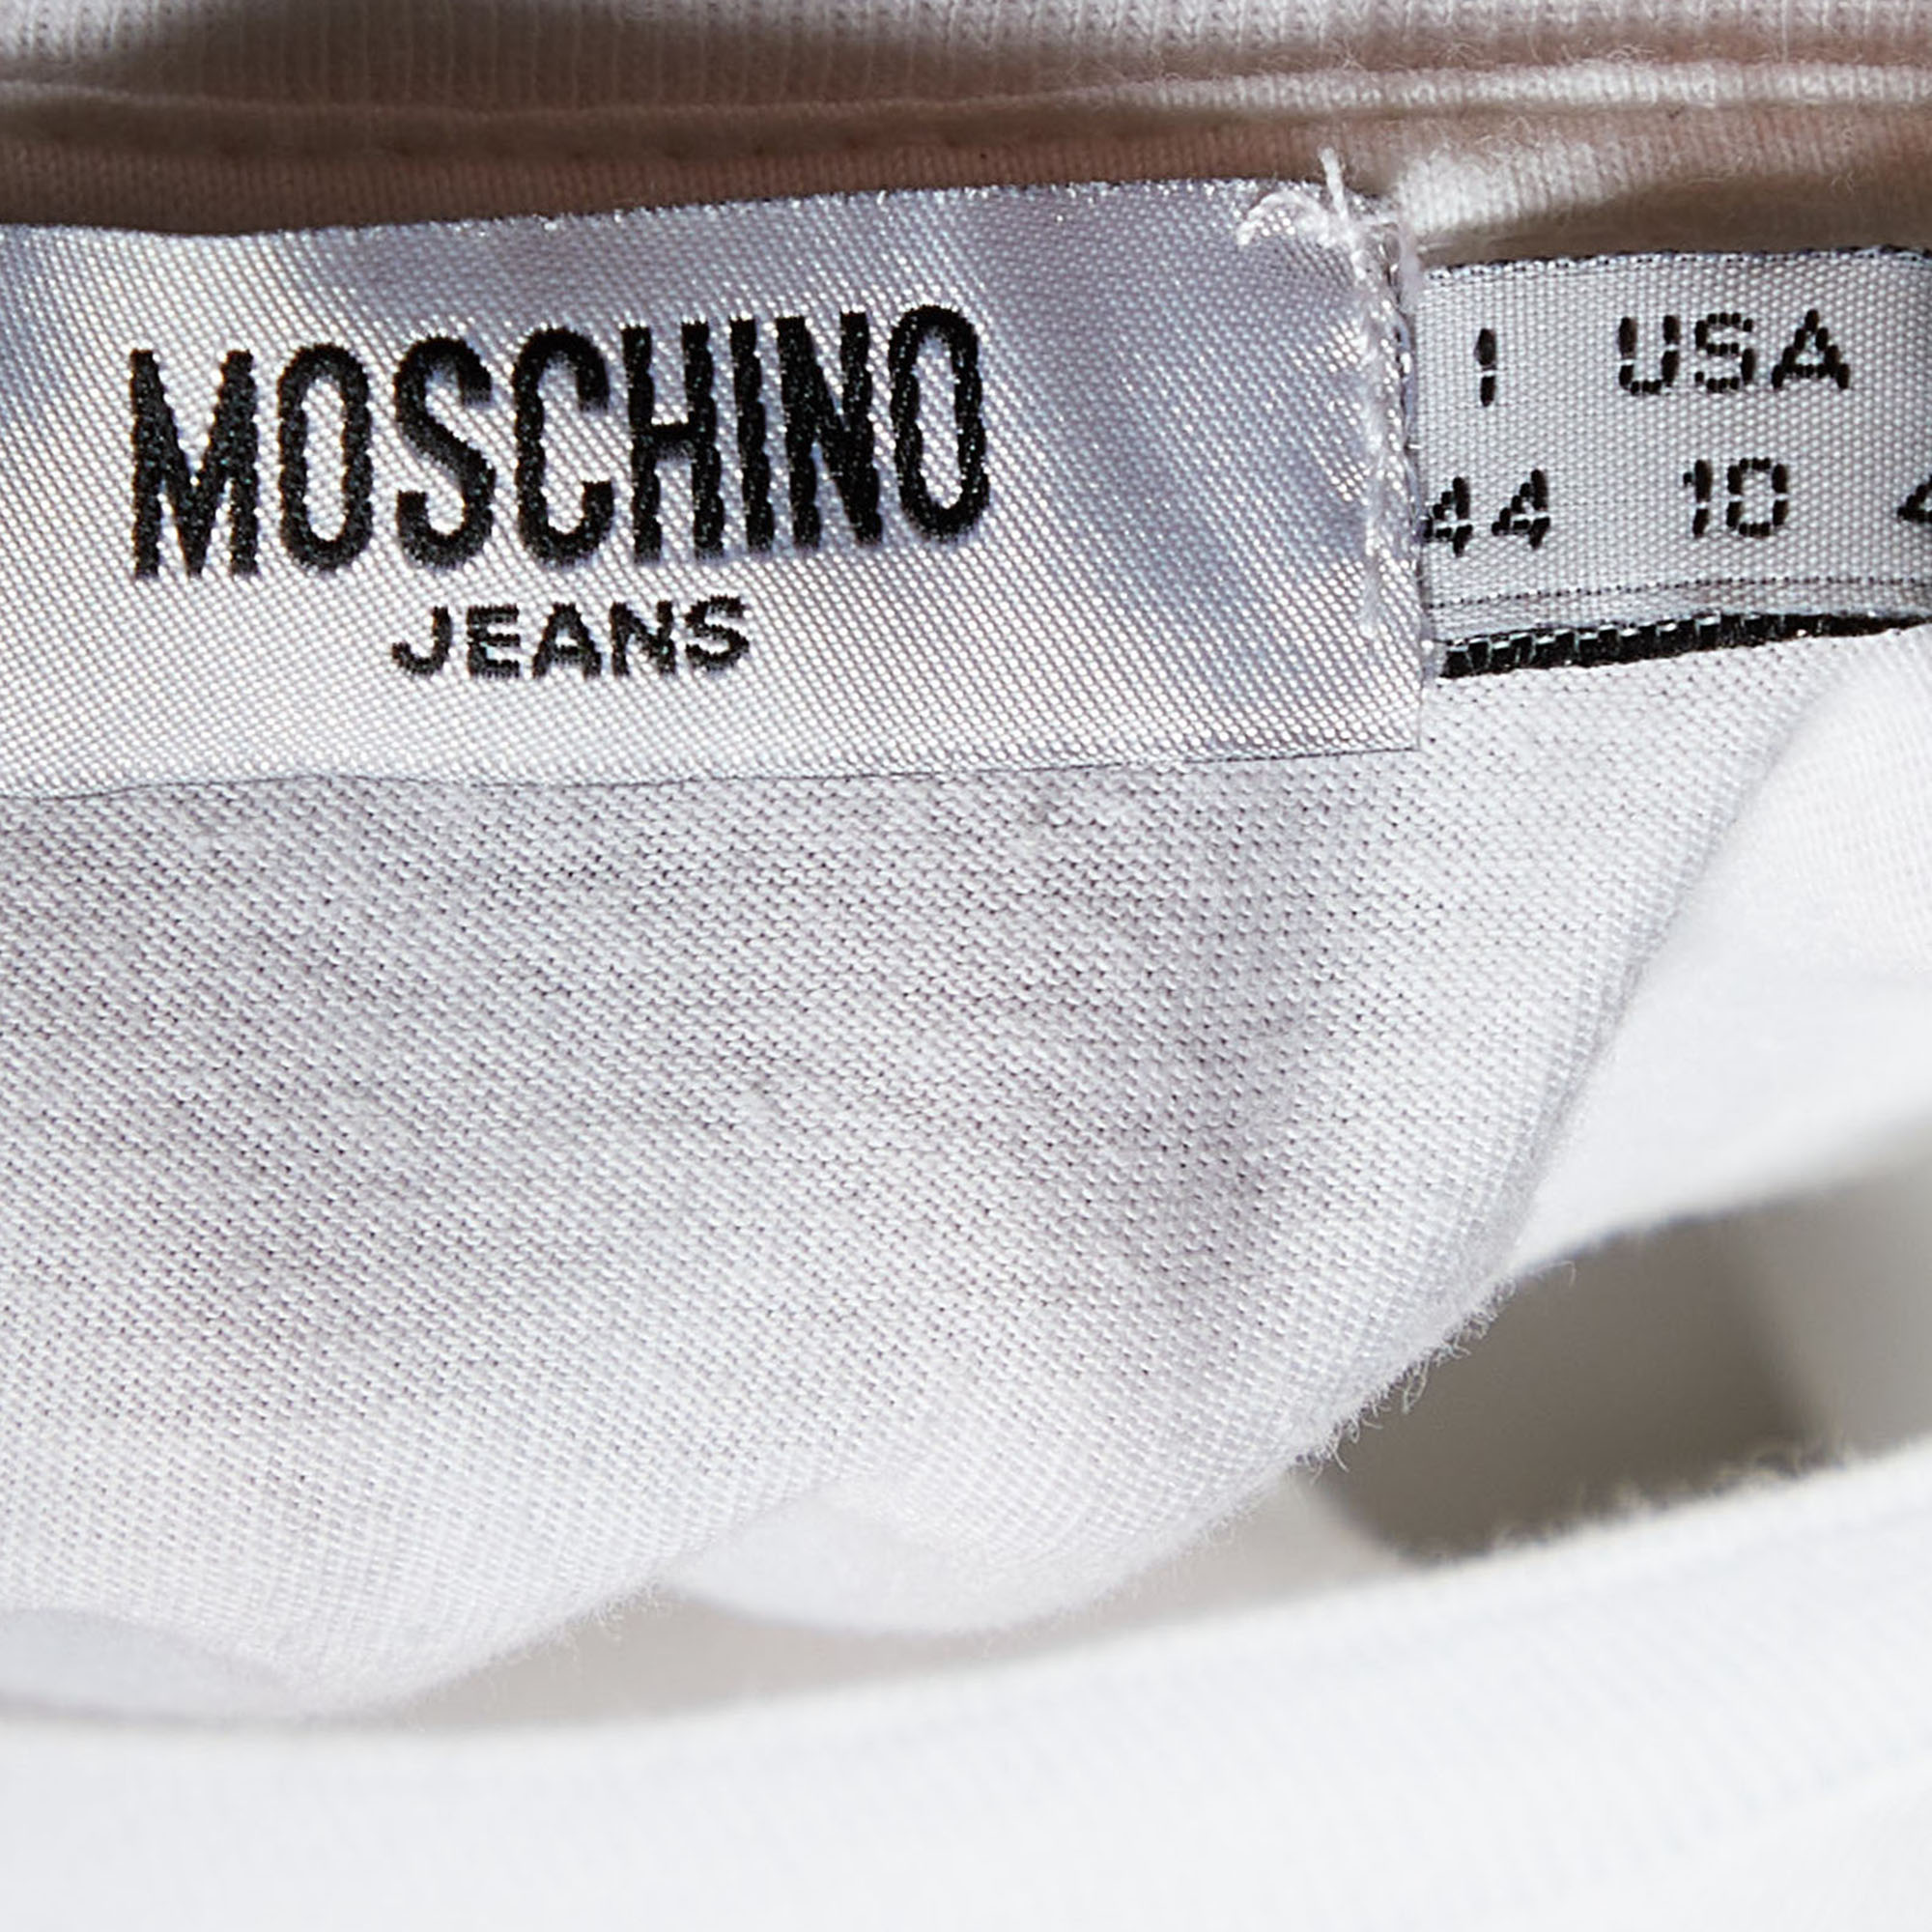 Moschino Jeans White Embellished & Printed Cotton Knit T-Shirt M